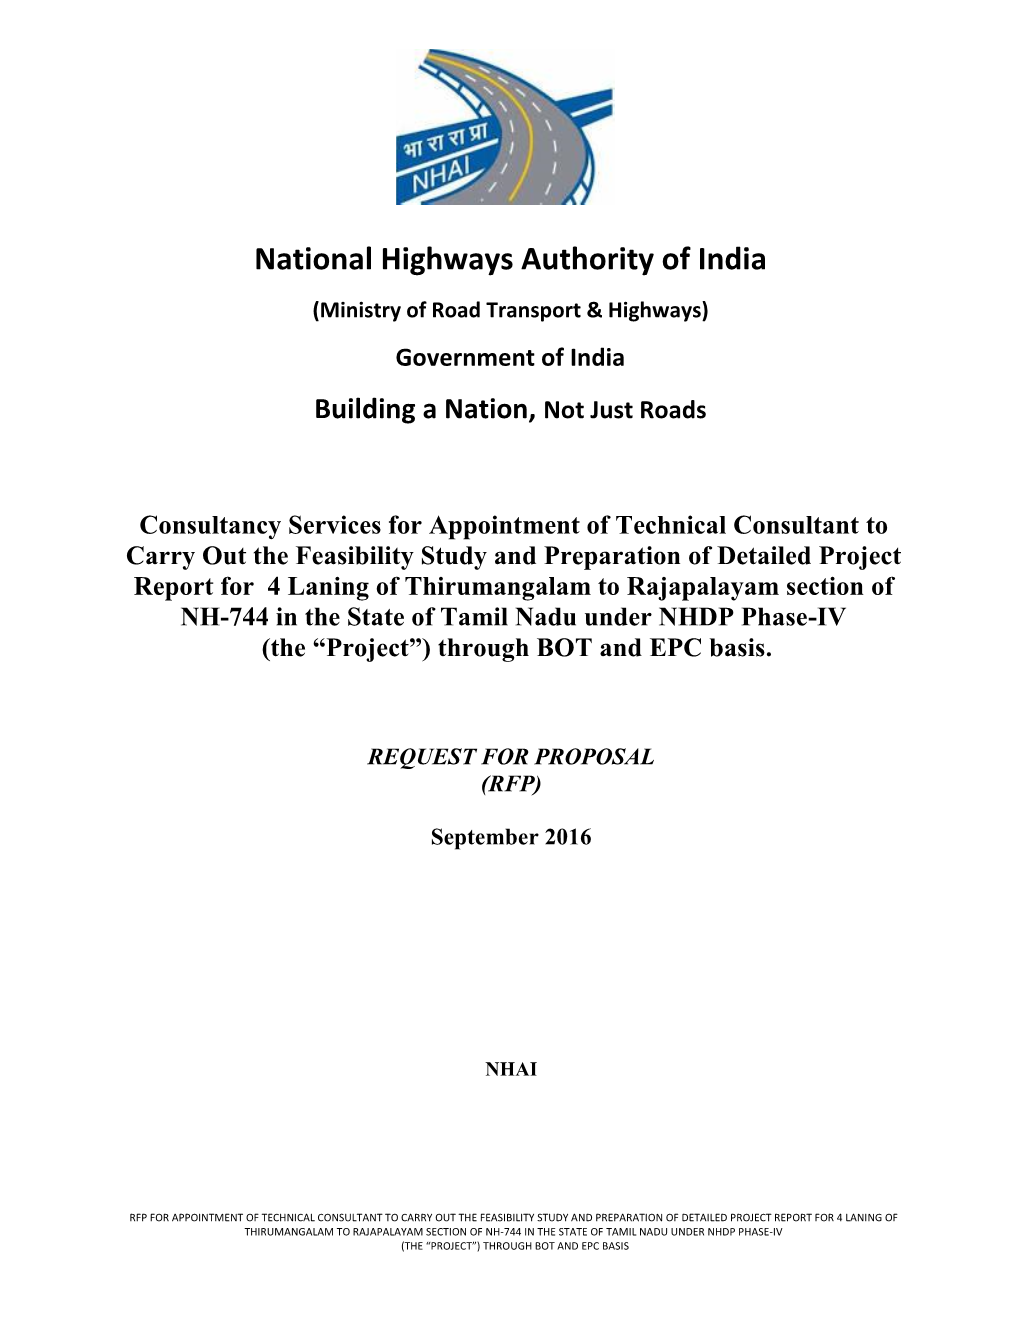 National Highways Authority of India (Ministry of Road Transport & Highways) Government of India Building a Nation, Not Just Roads